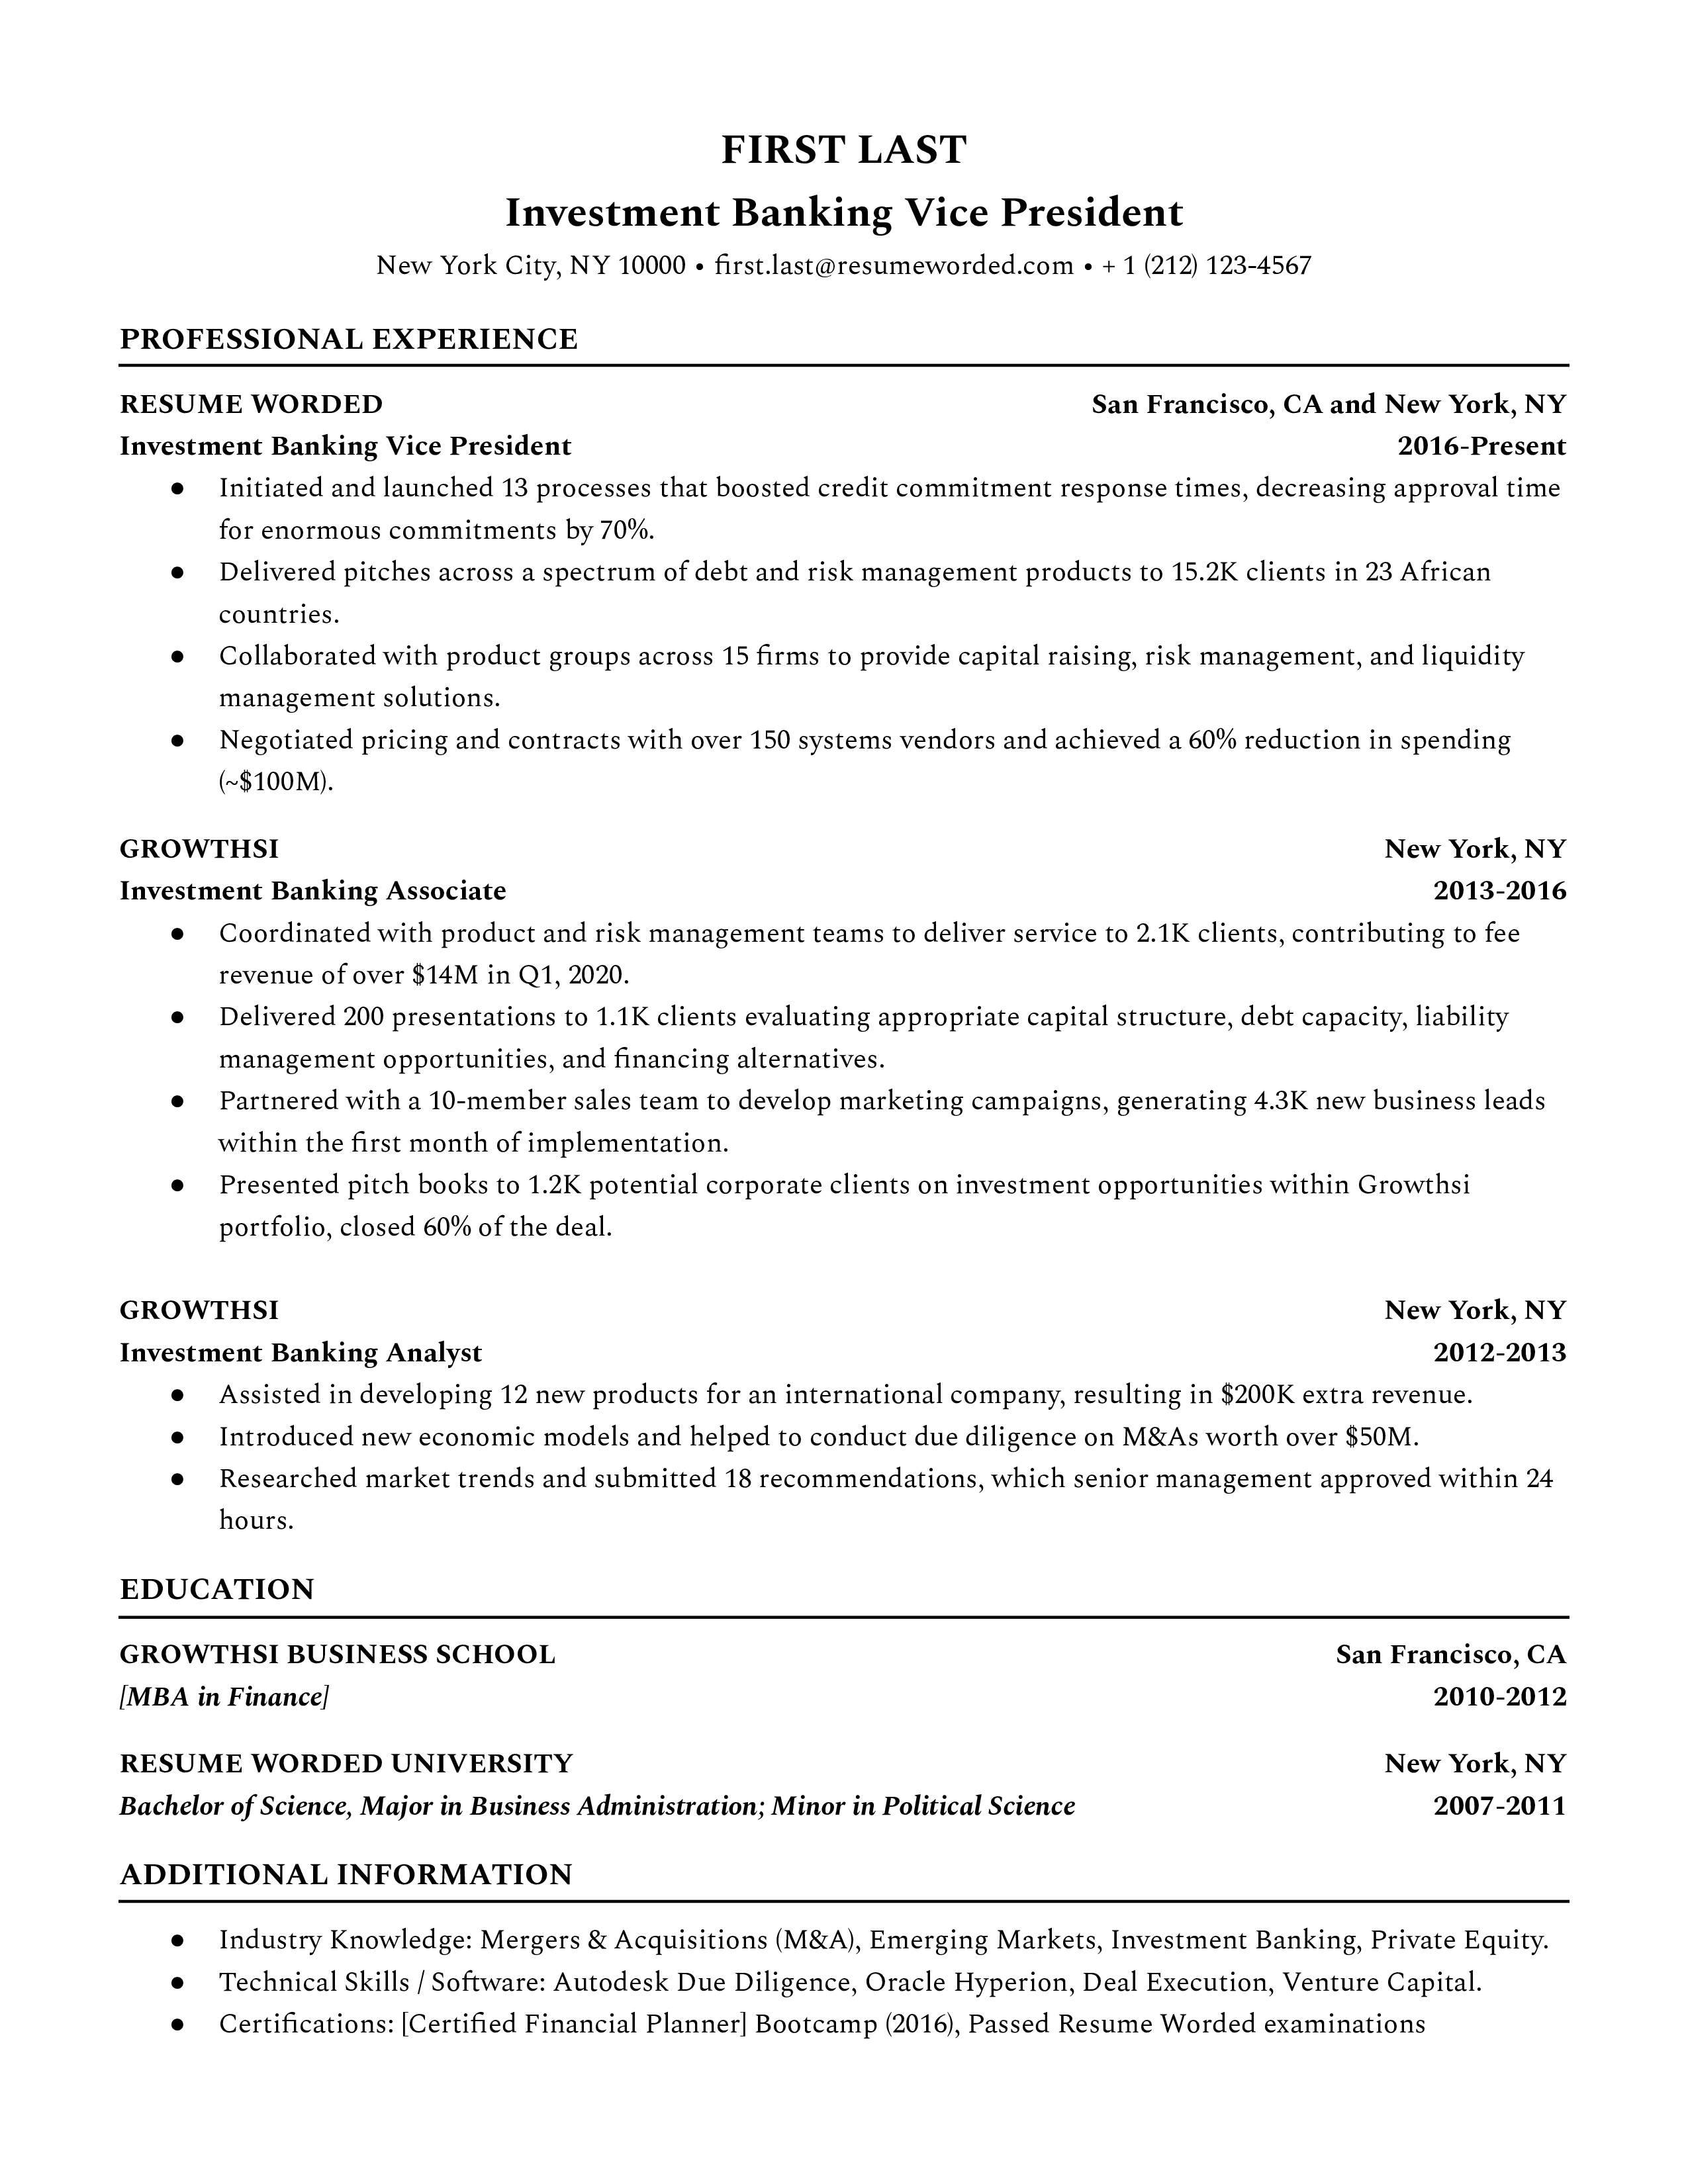 An investment banking vice president resume sample highlighting the applicant’s presentation skills and professional network.